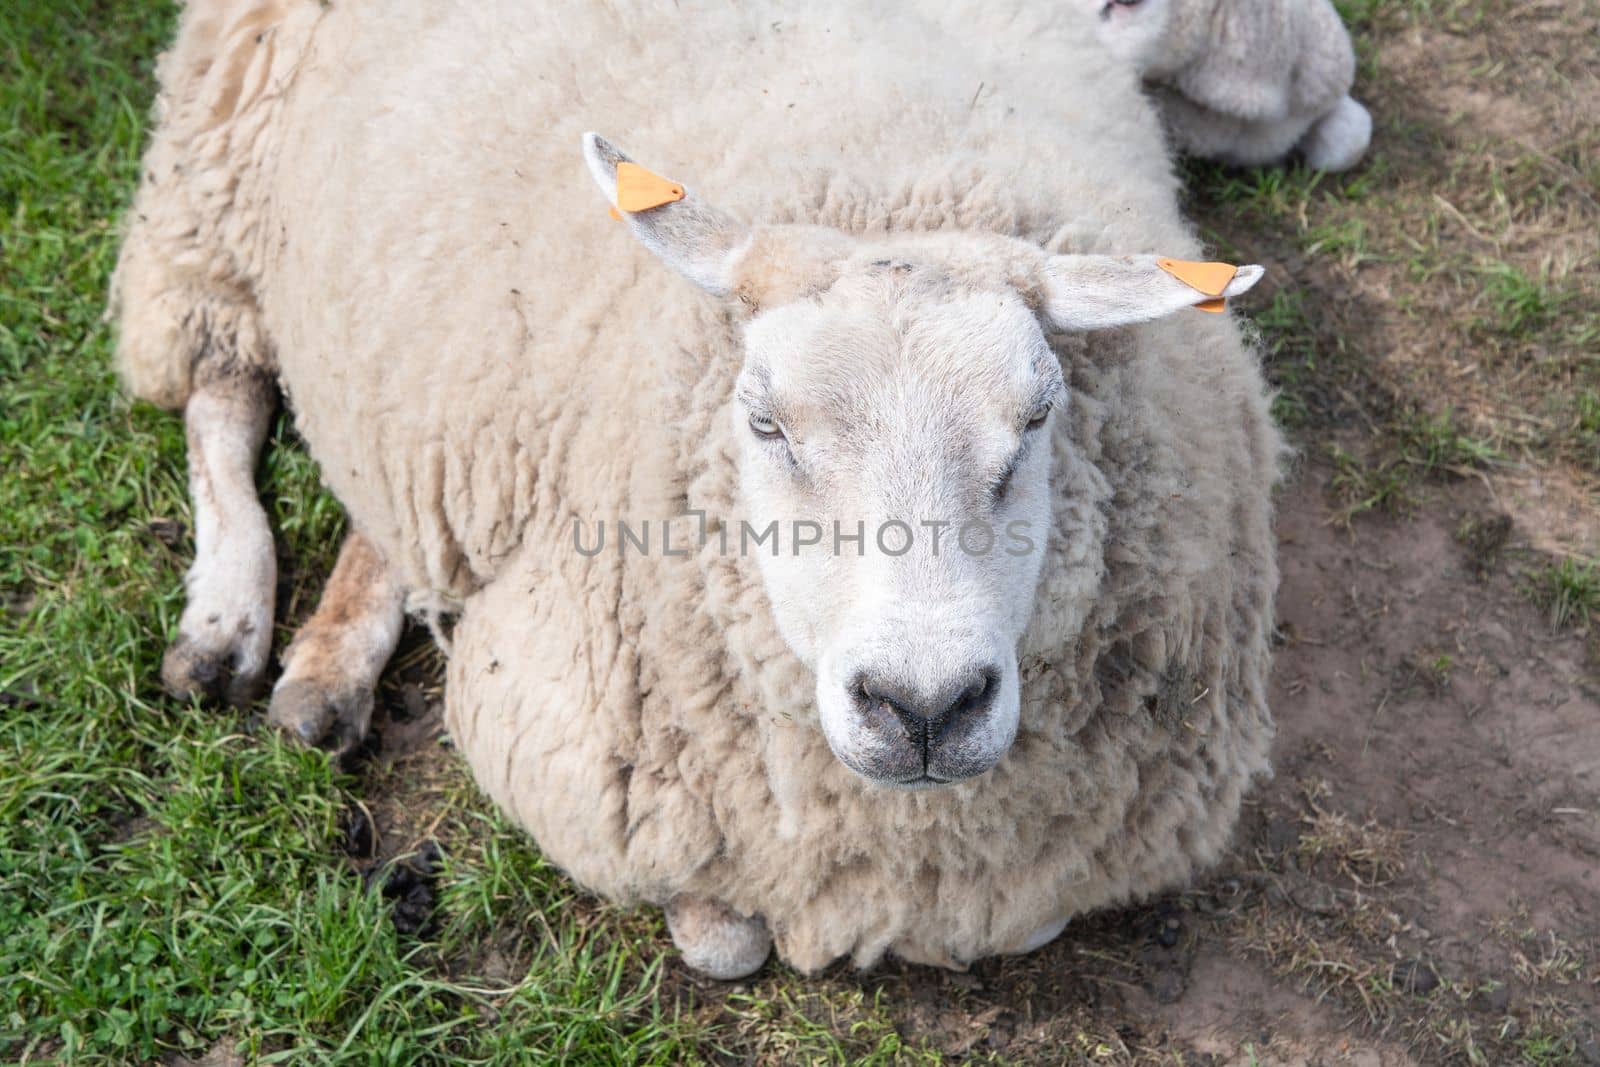 one fat white sheep with thick white wool laying on green grass, a four-legged farm animal that chews its cud, the concept of ecological livestock grazing on natural forage, High quality photo